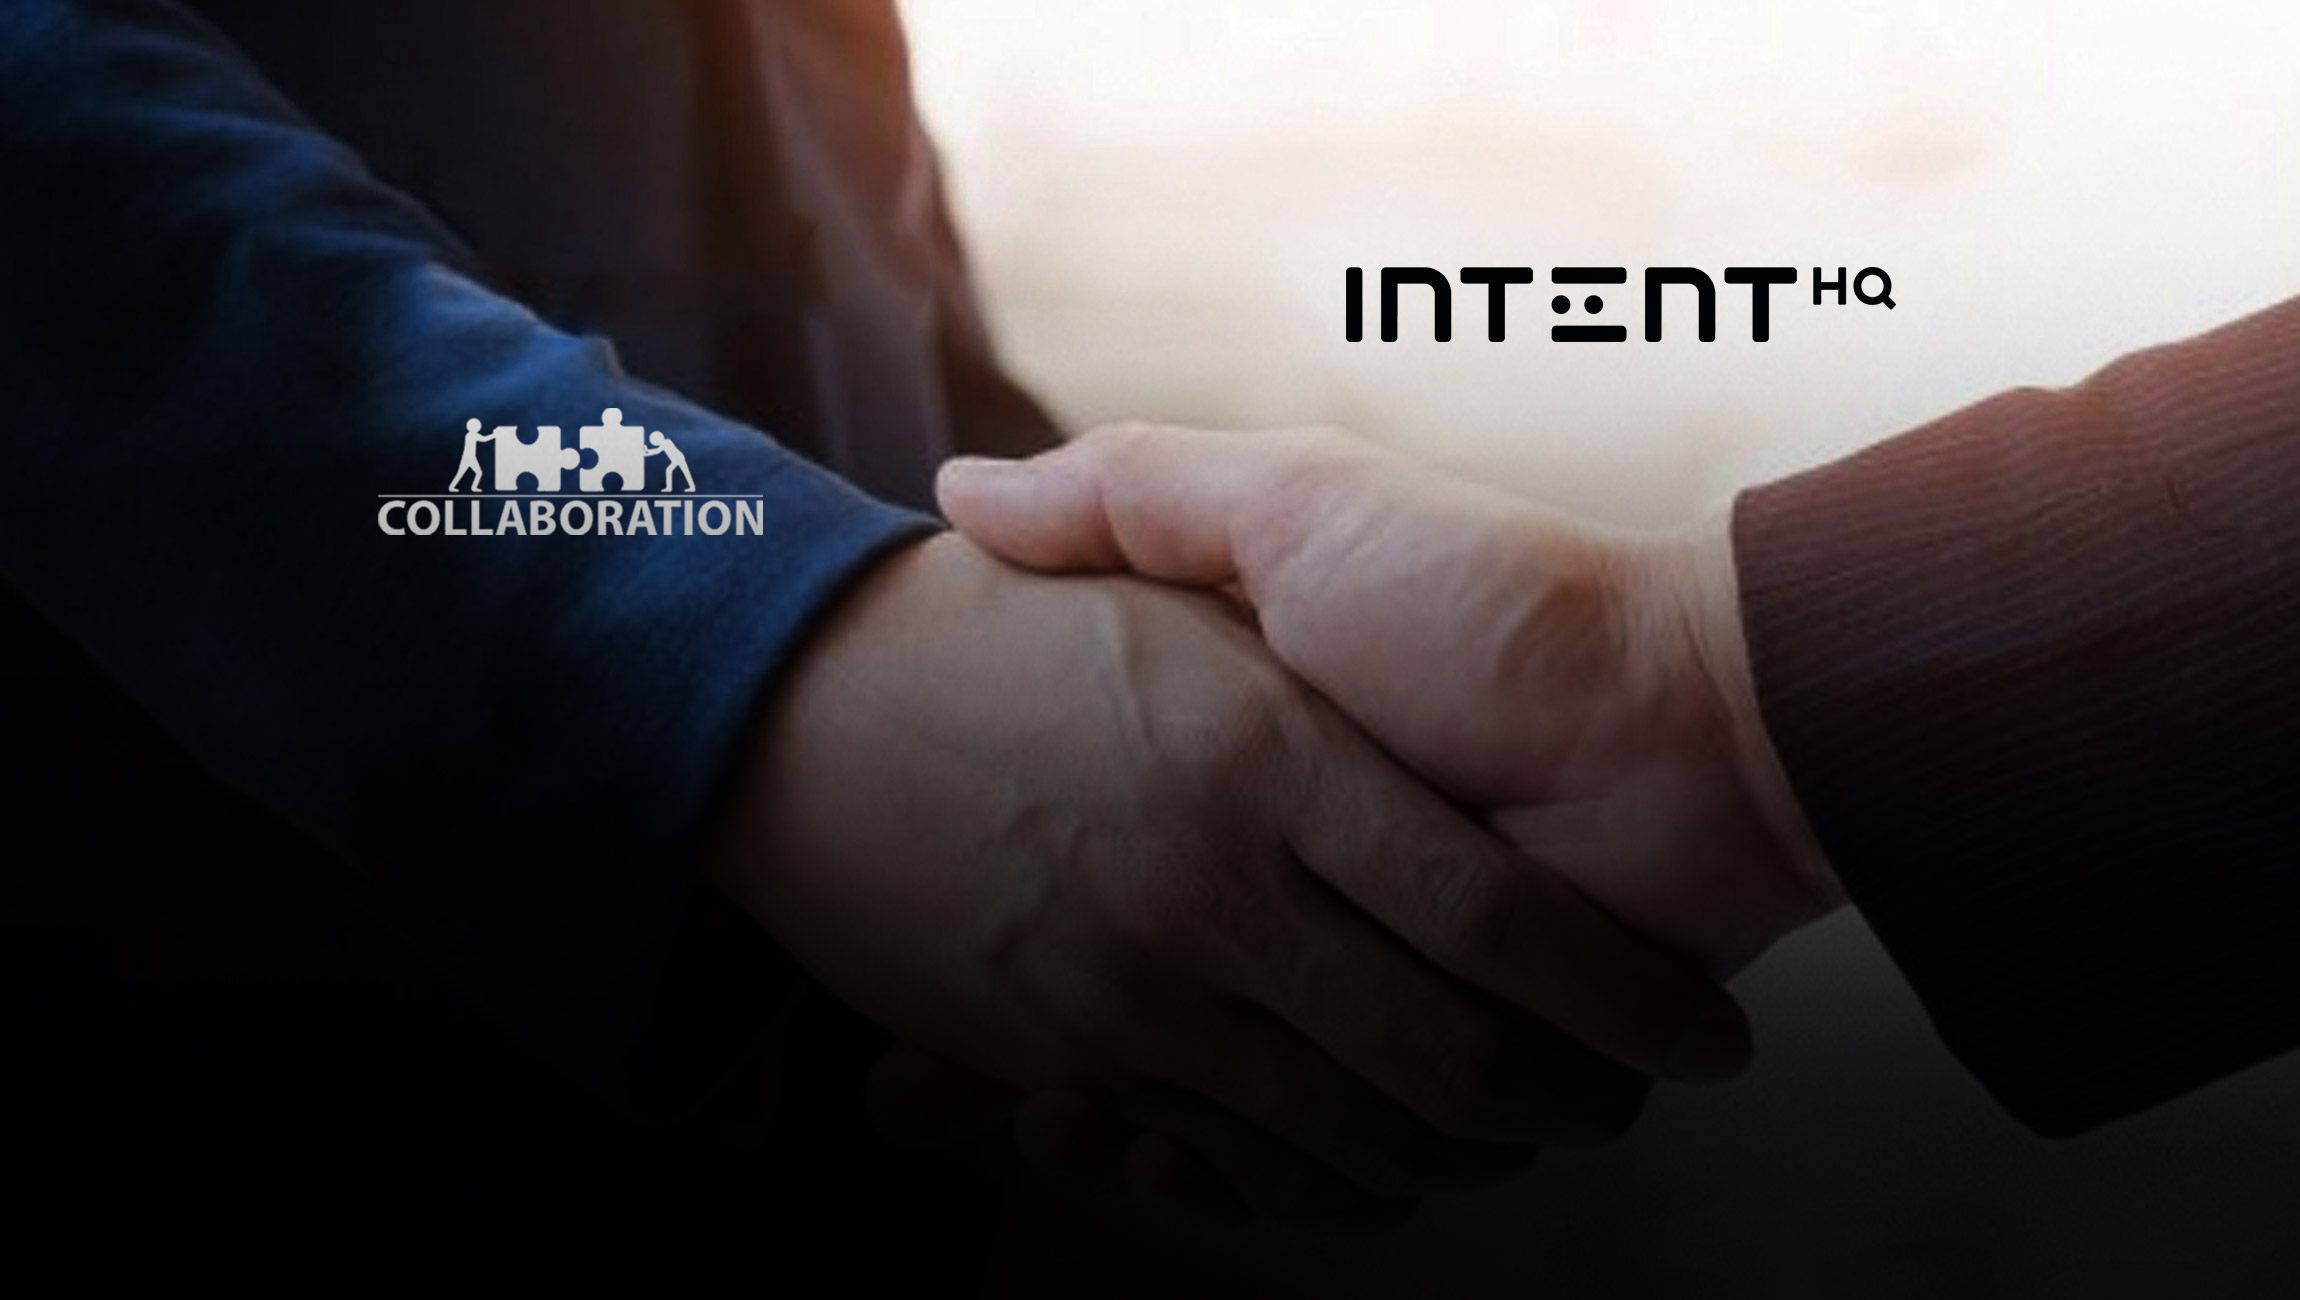 Intent HQ Partners with IESE Business School to Create the First Marketing Chair